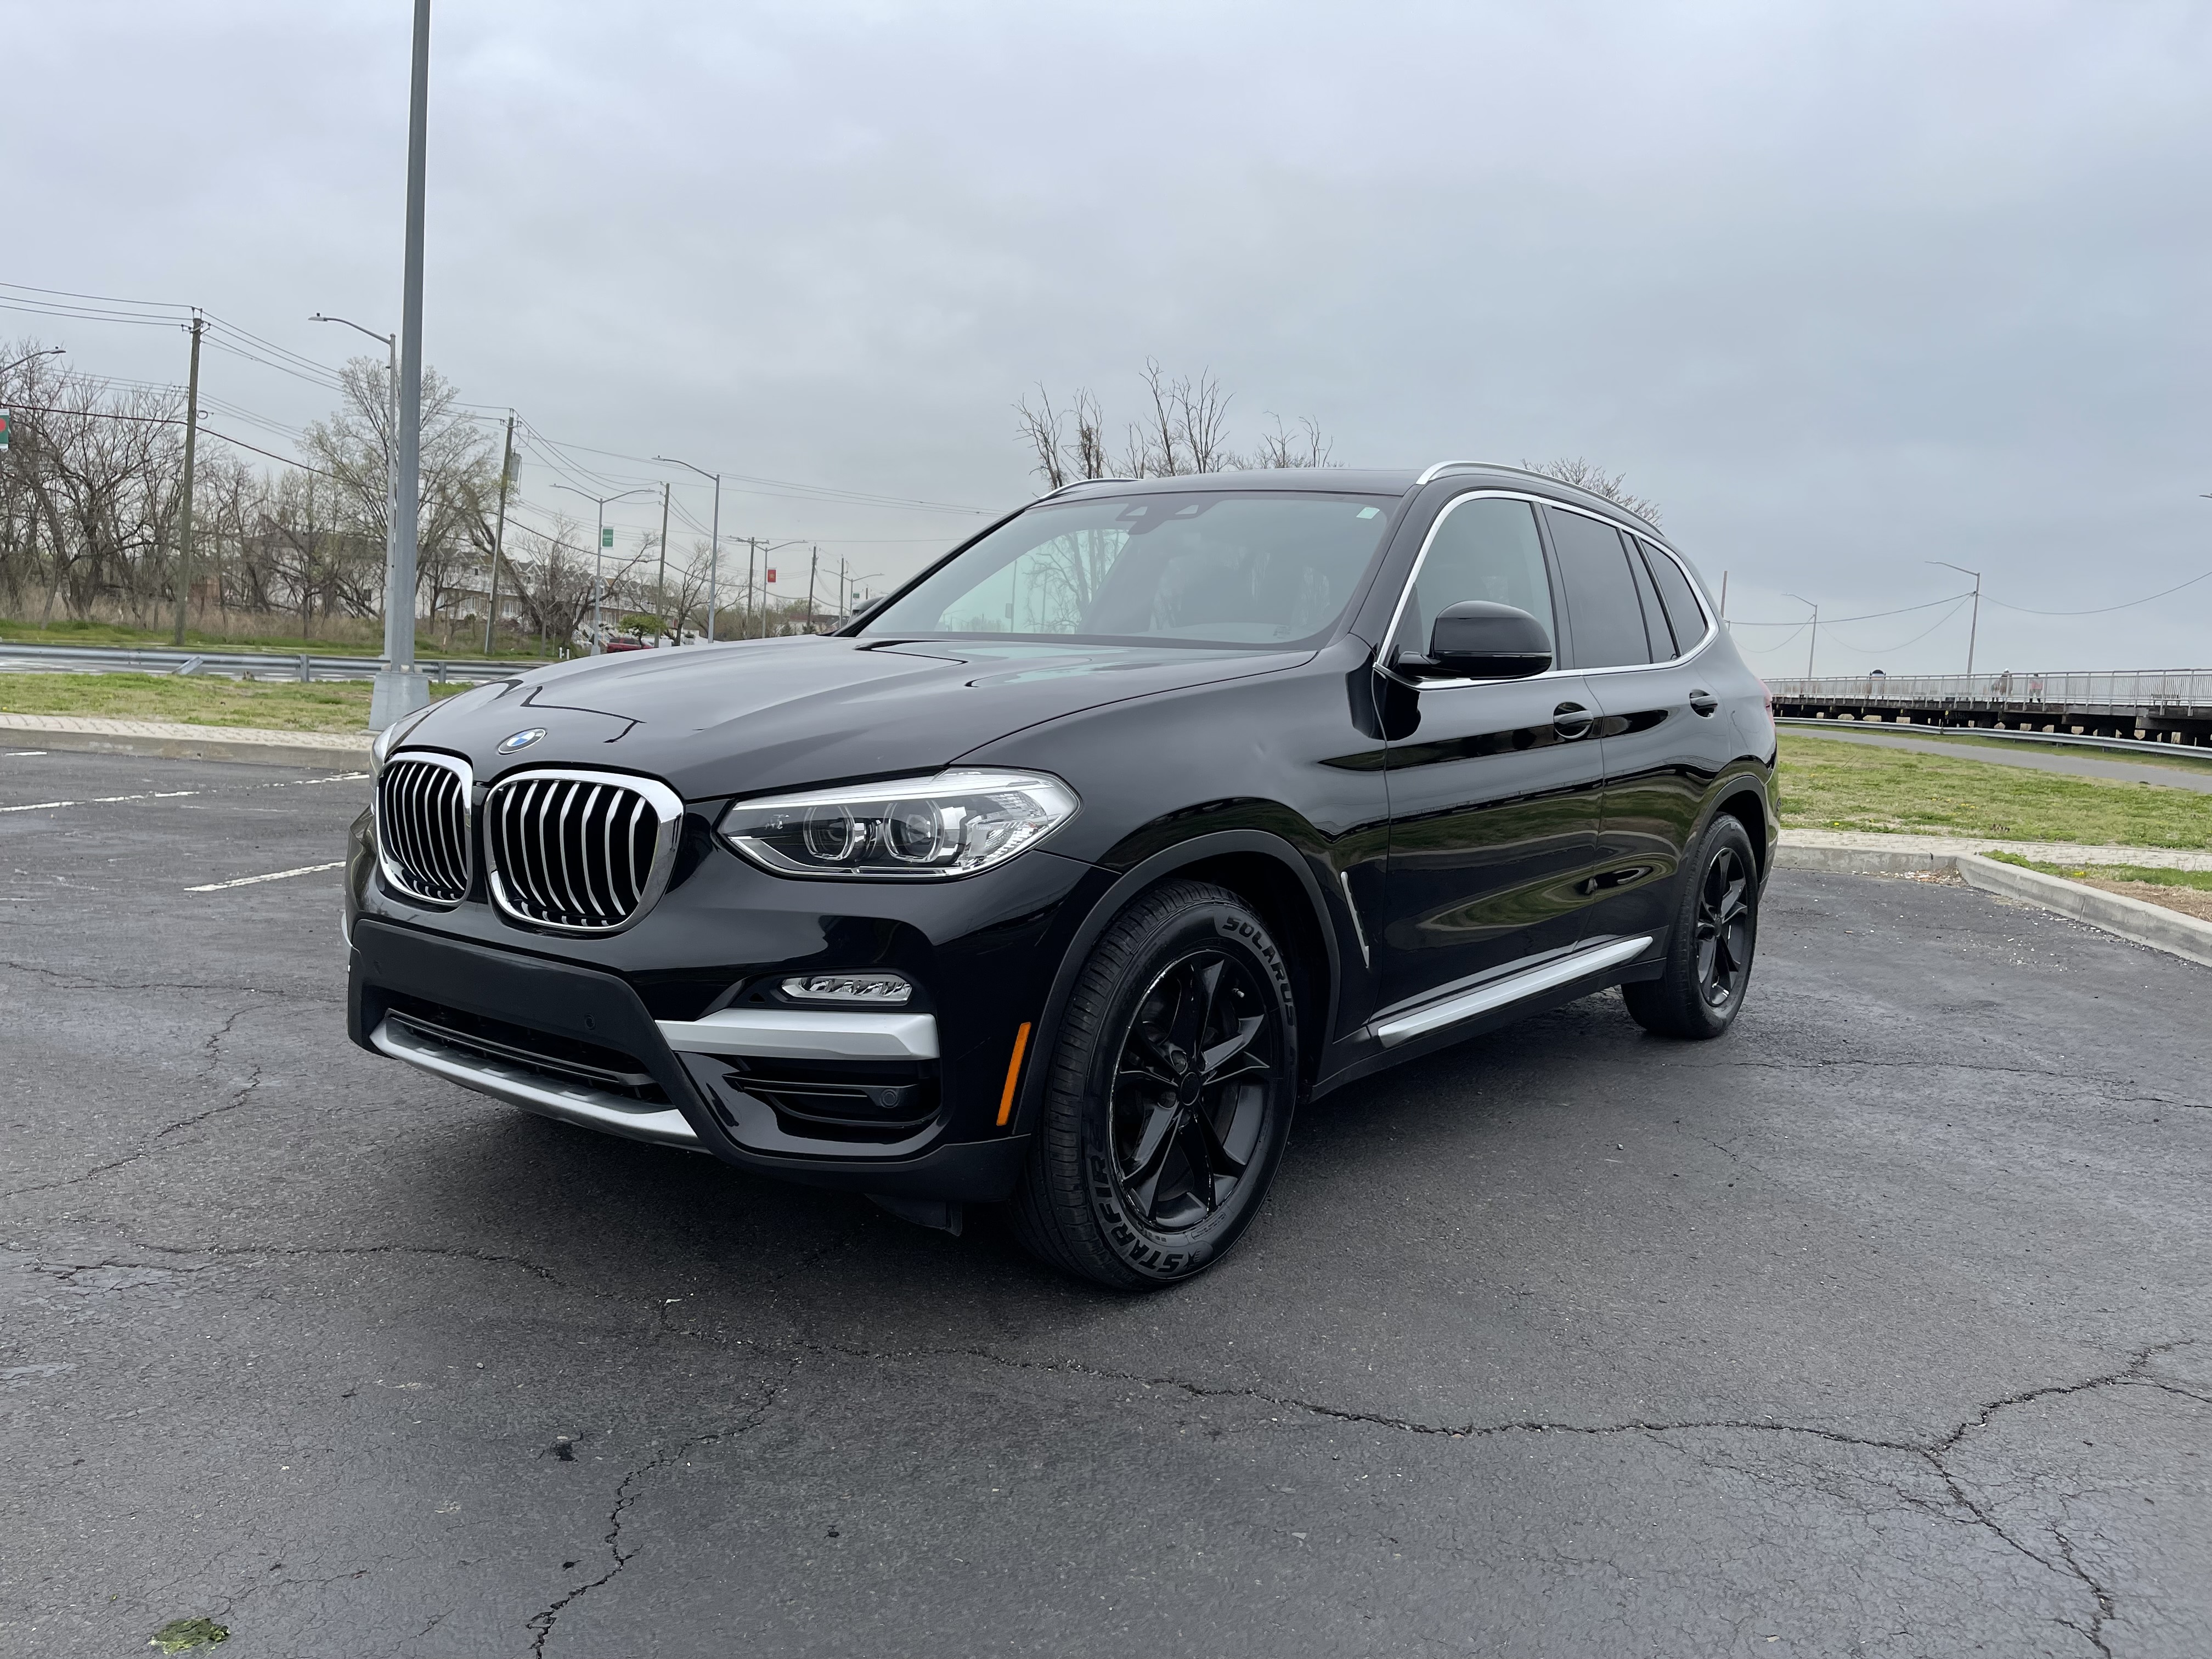 Used Car - 2019 BMW X3 sDrive30i for Sale in Staten Island, NY